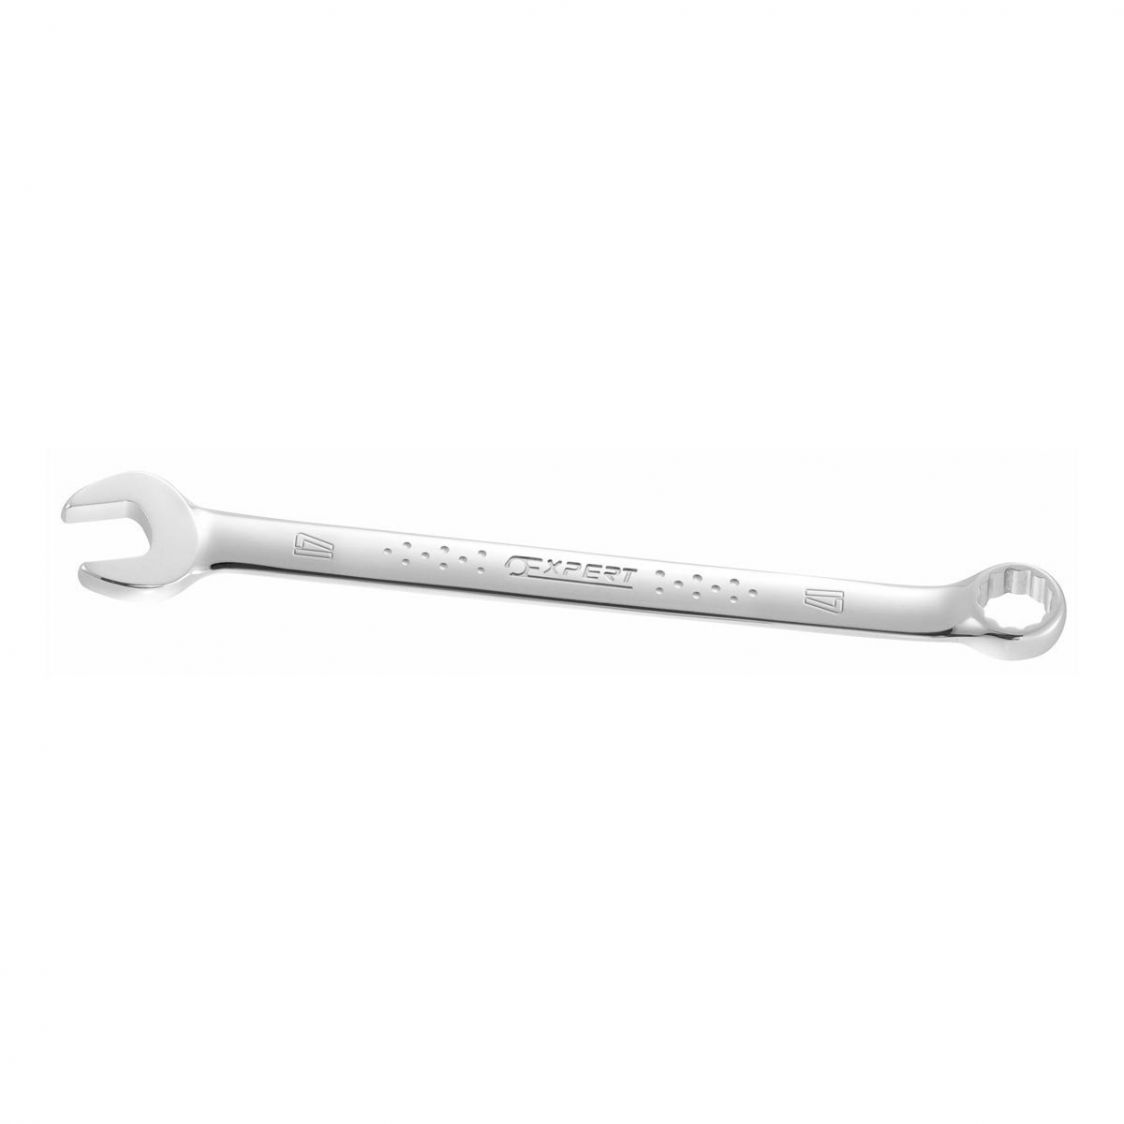 EXPERT by FACOM E110705 - 12mm Metric Long Combination Spanner